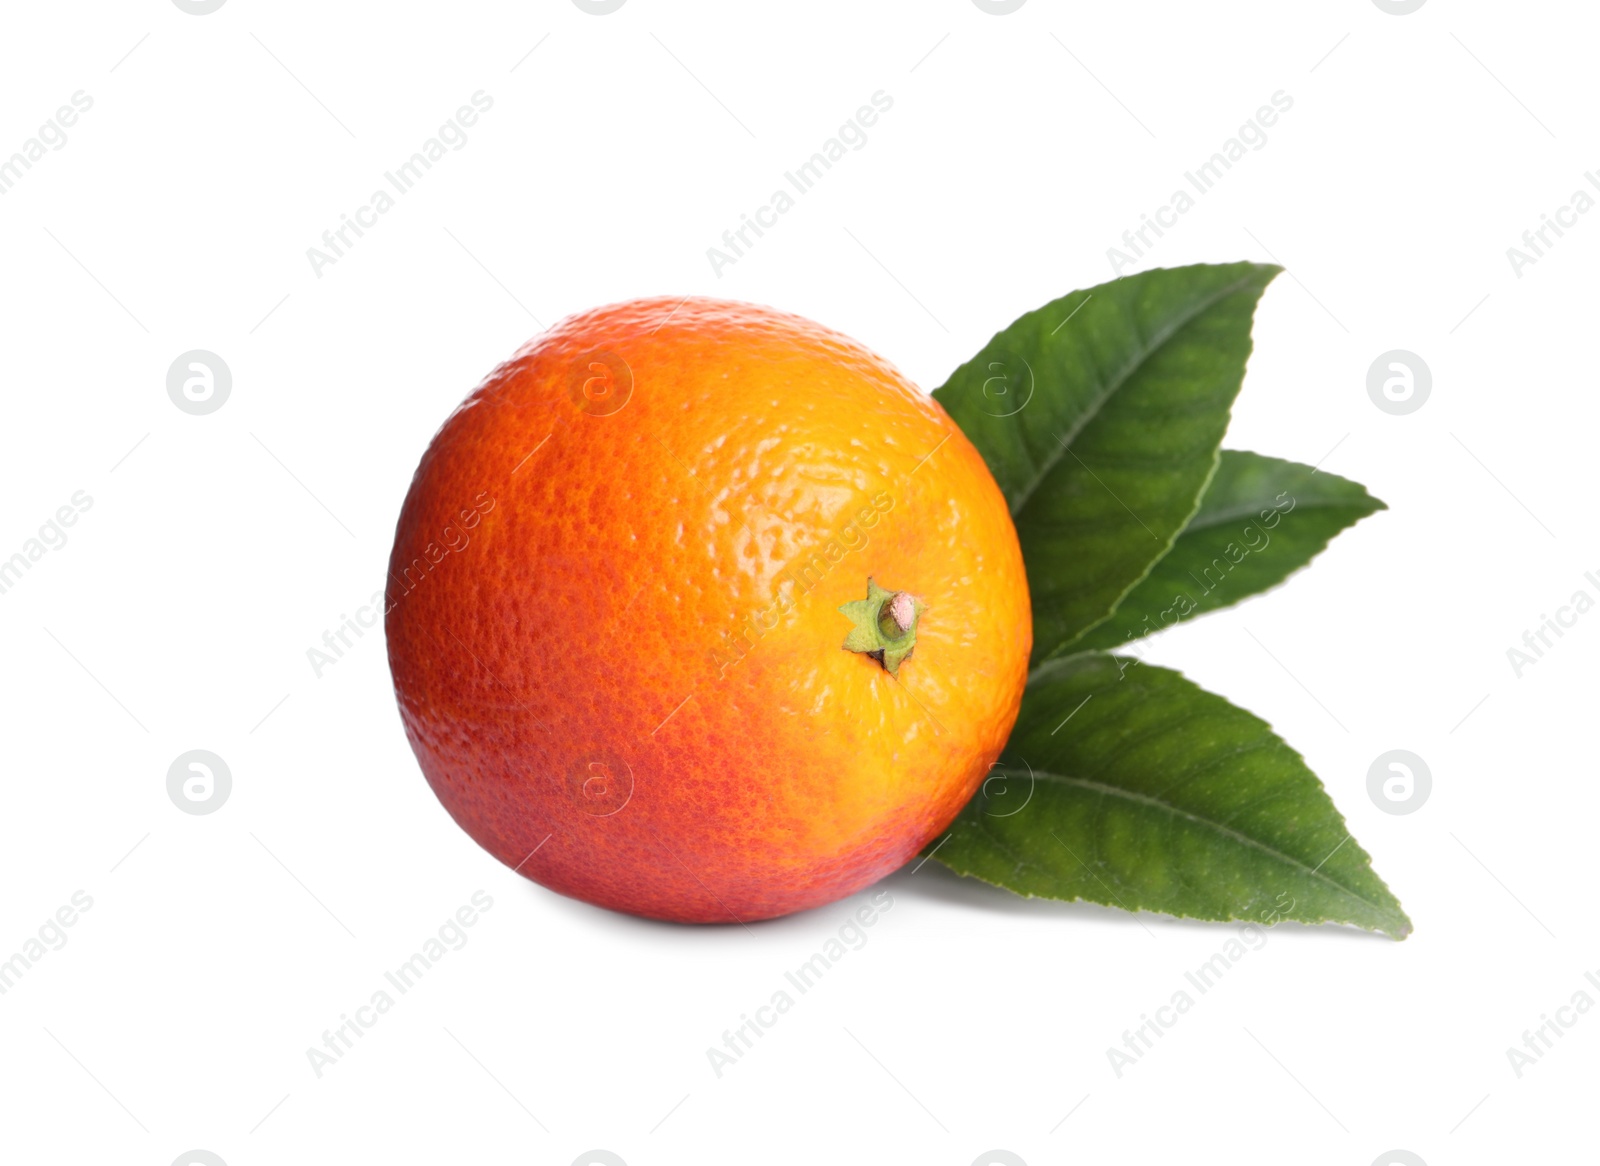 Photo of Whole ripe red orange with green leaves on white background